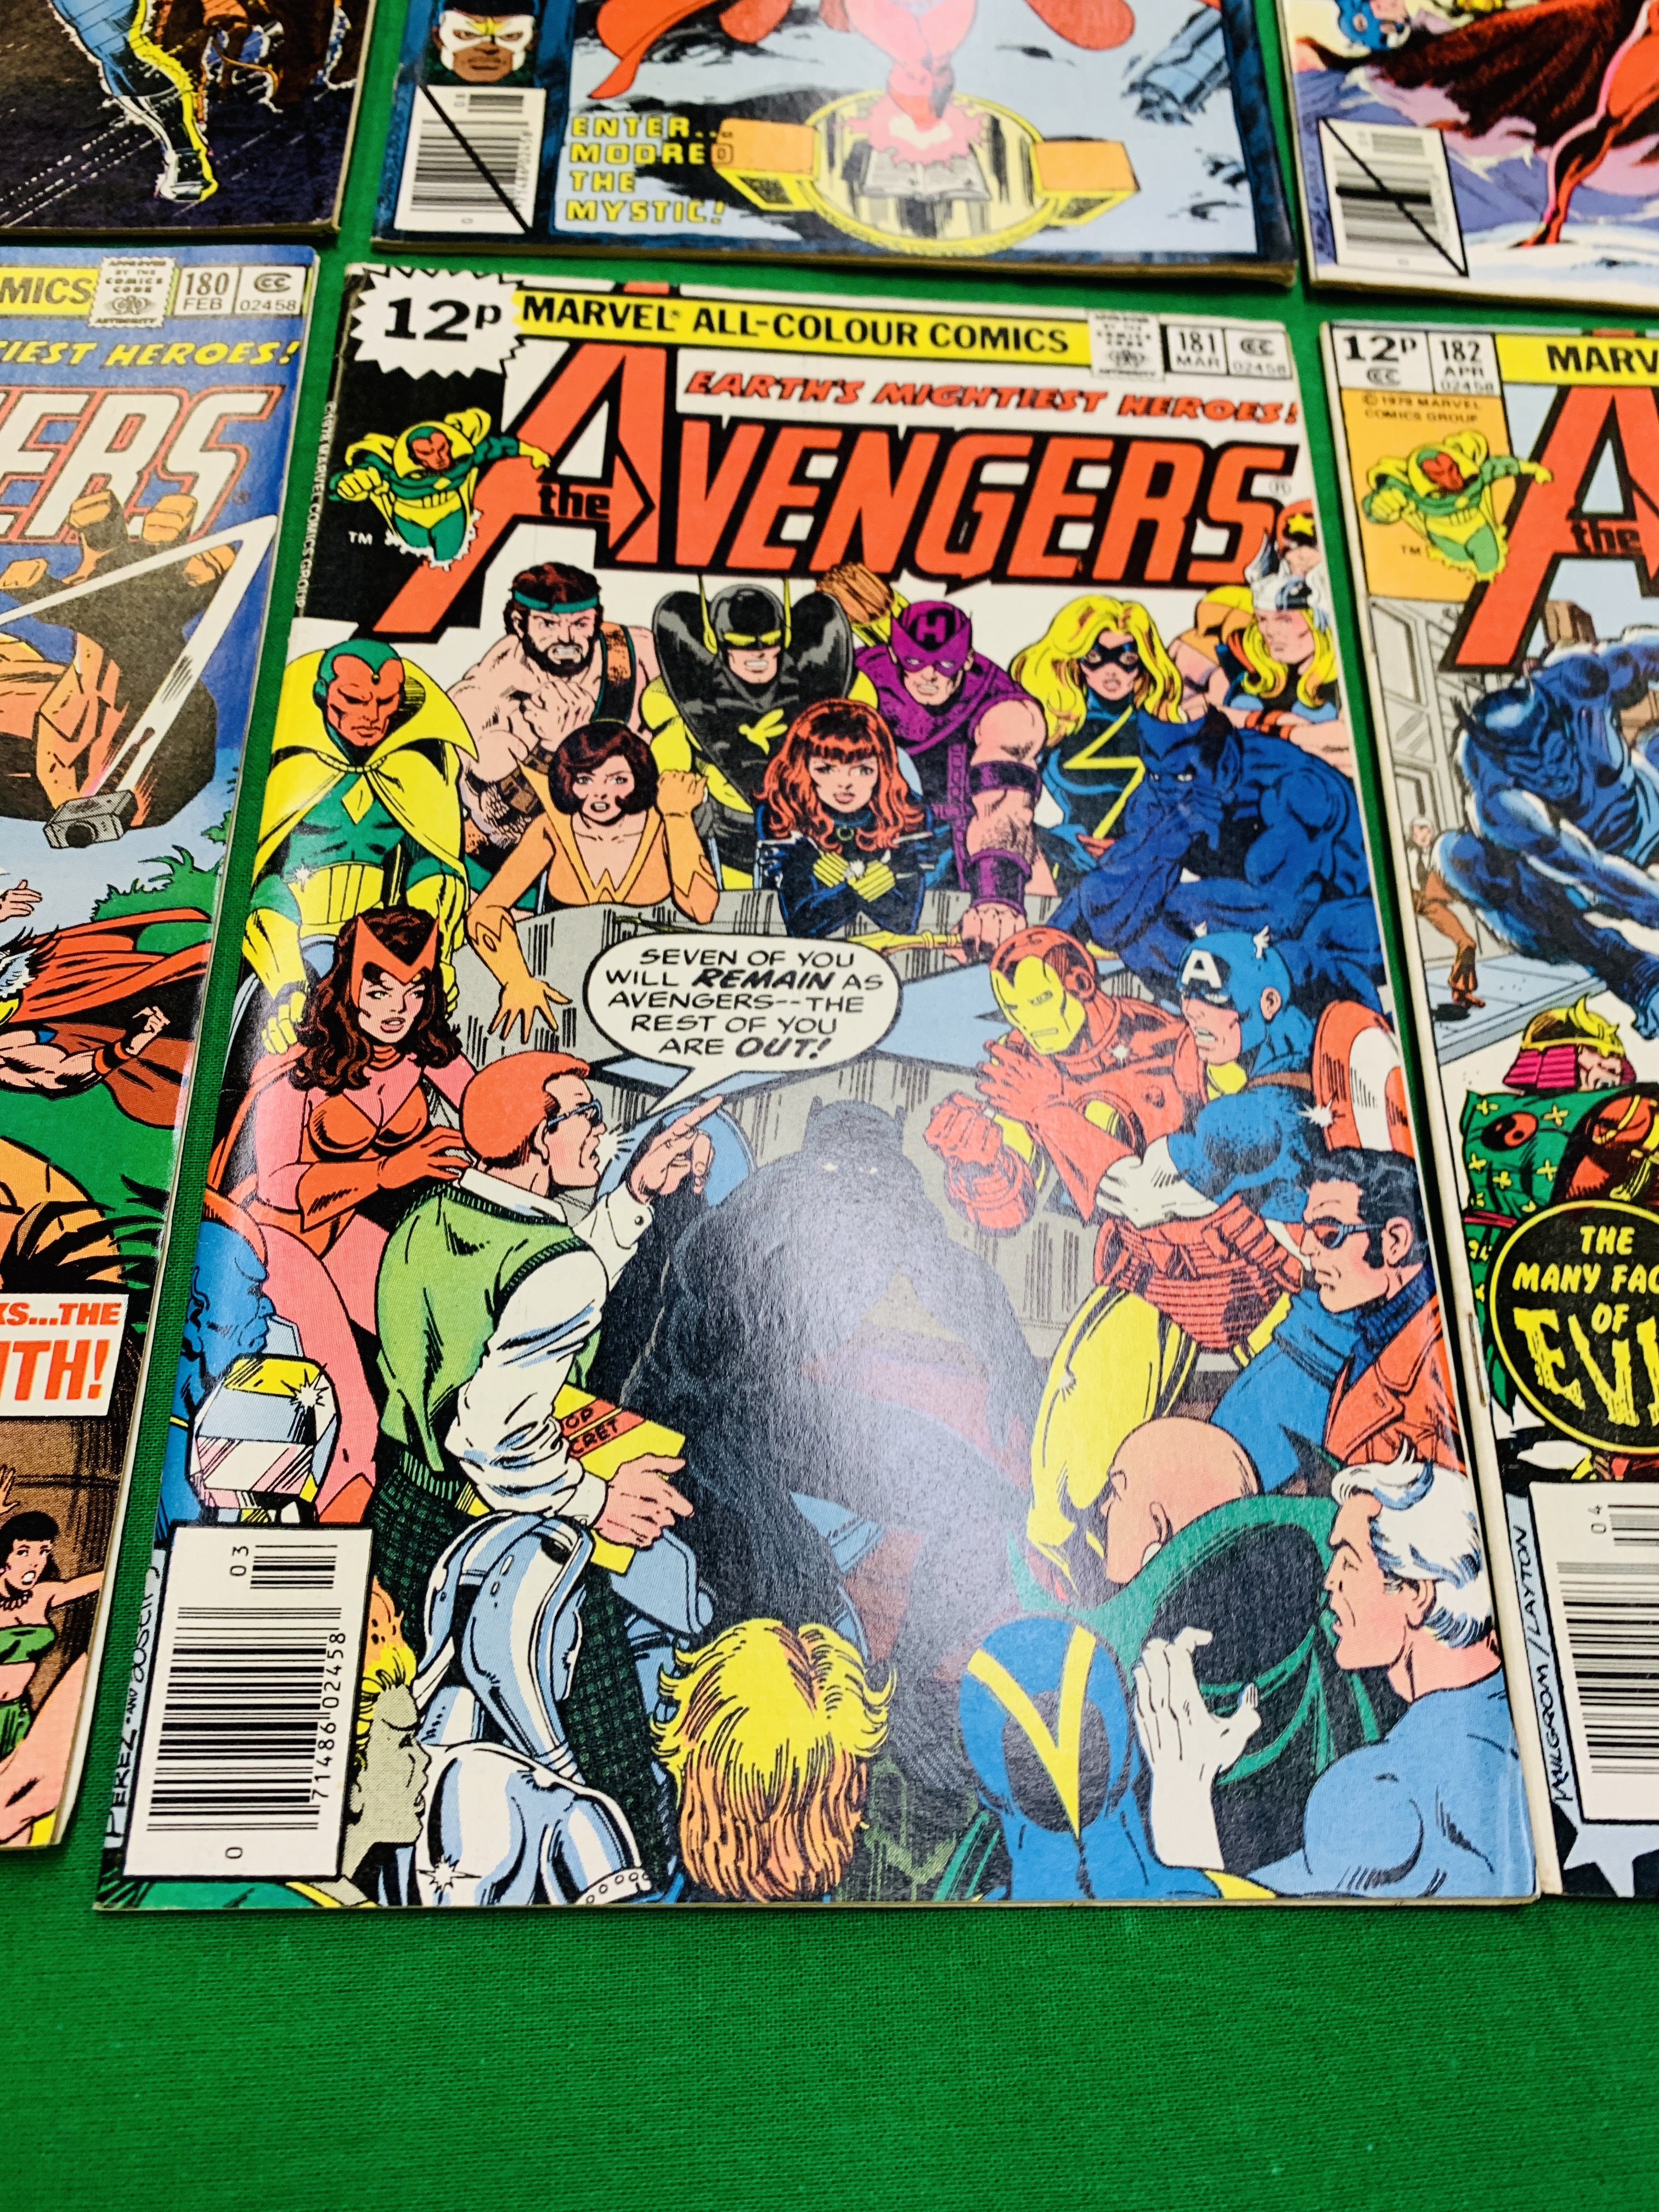 MARVEL COMICS THE AVENGERS NO. 101 - 299, MISSING ISSUES 103 AND 110. - Image 60 of 130